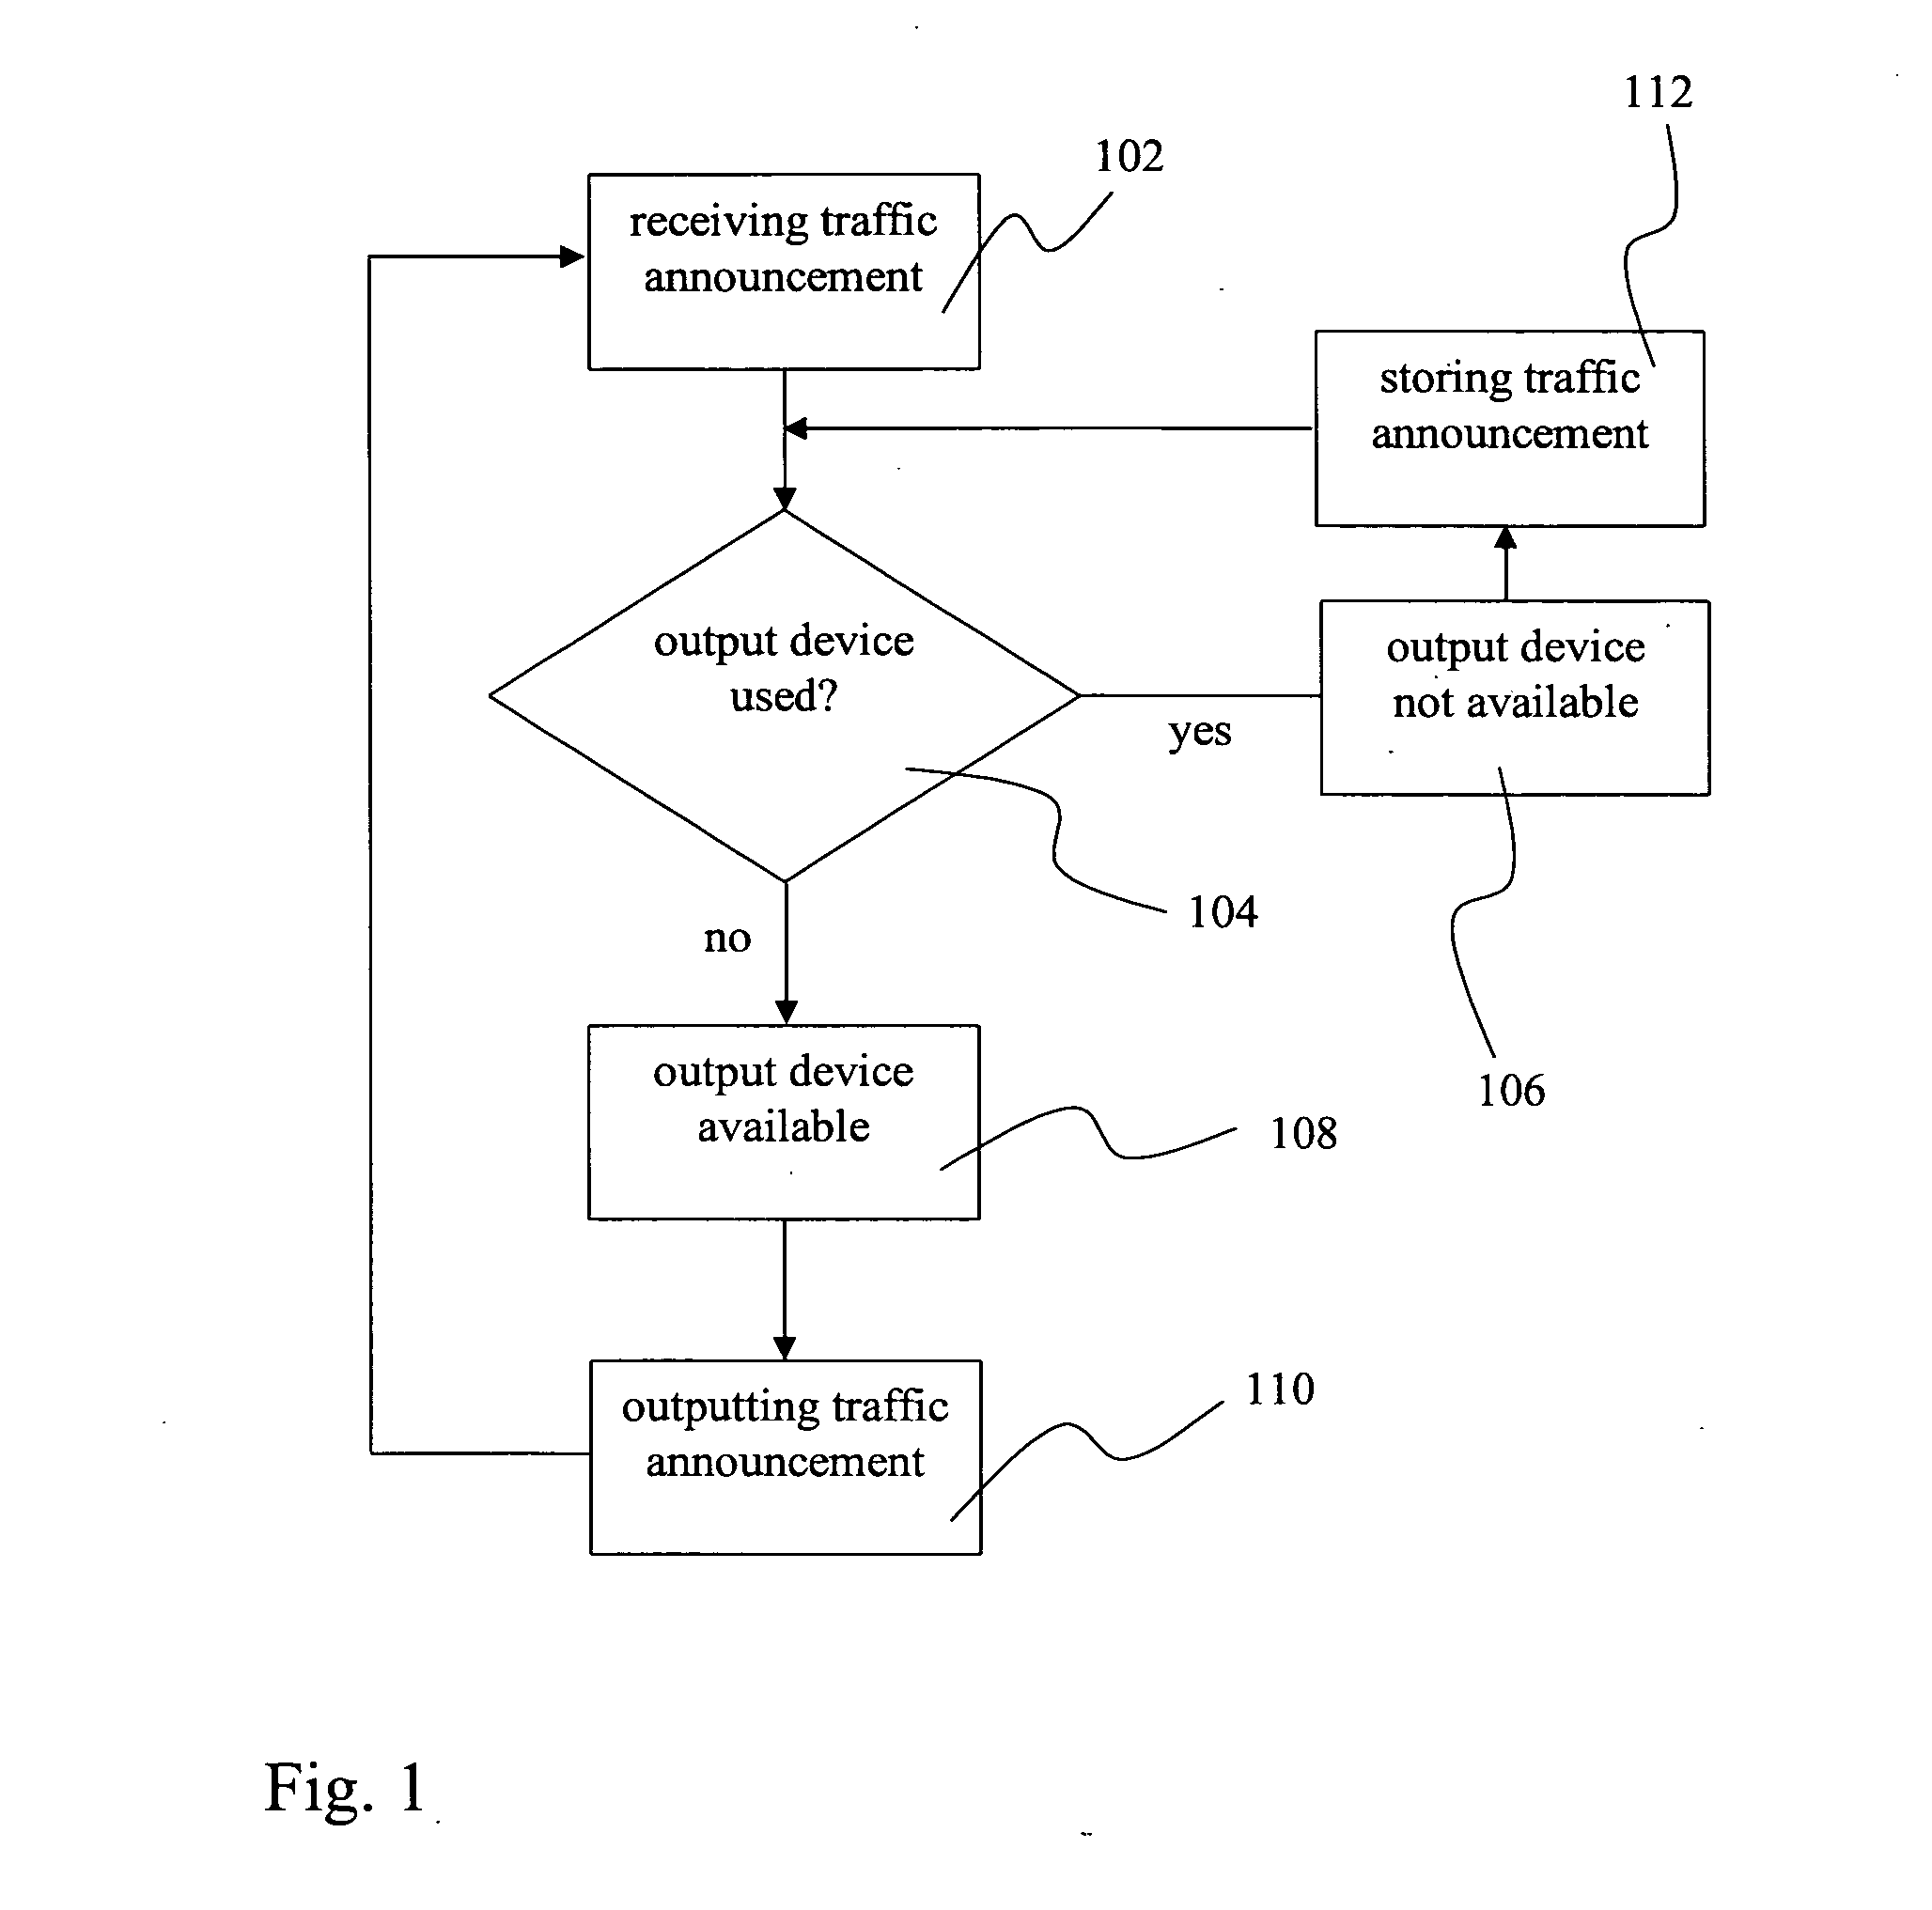 Method and system for context sensitive presenting of traffic announcements